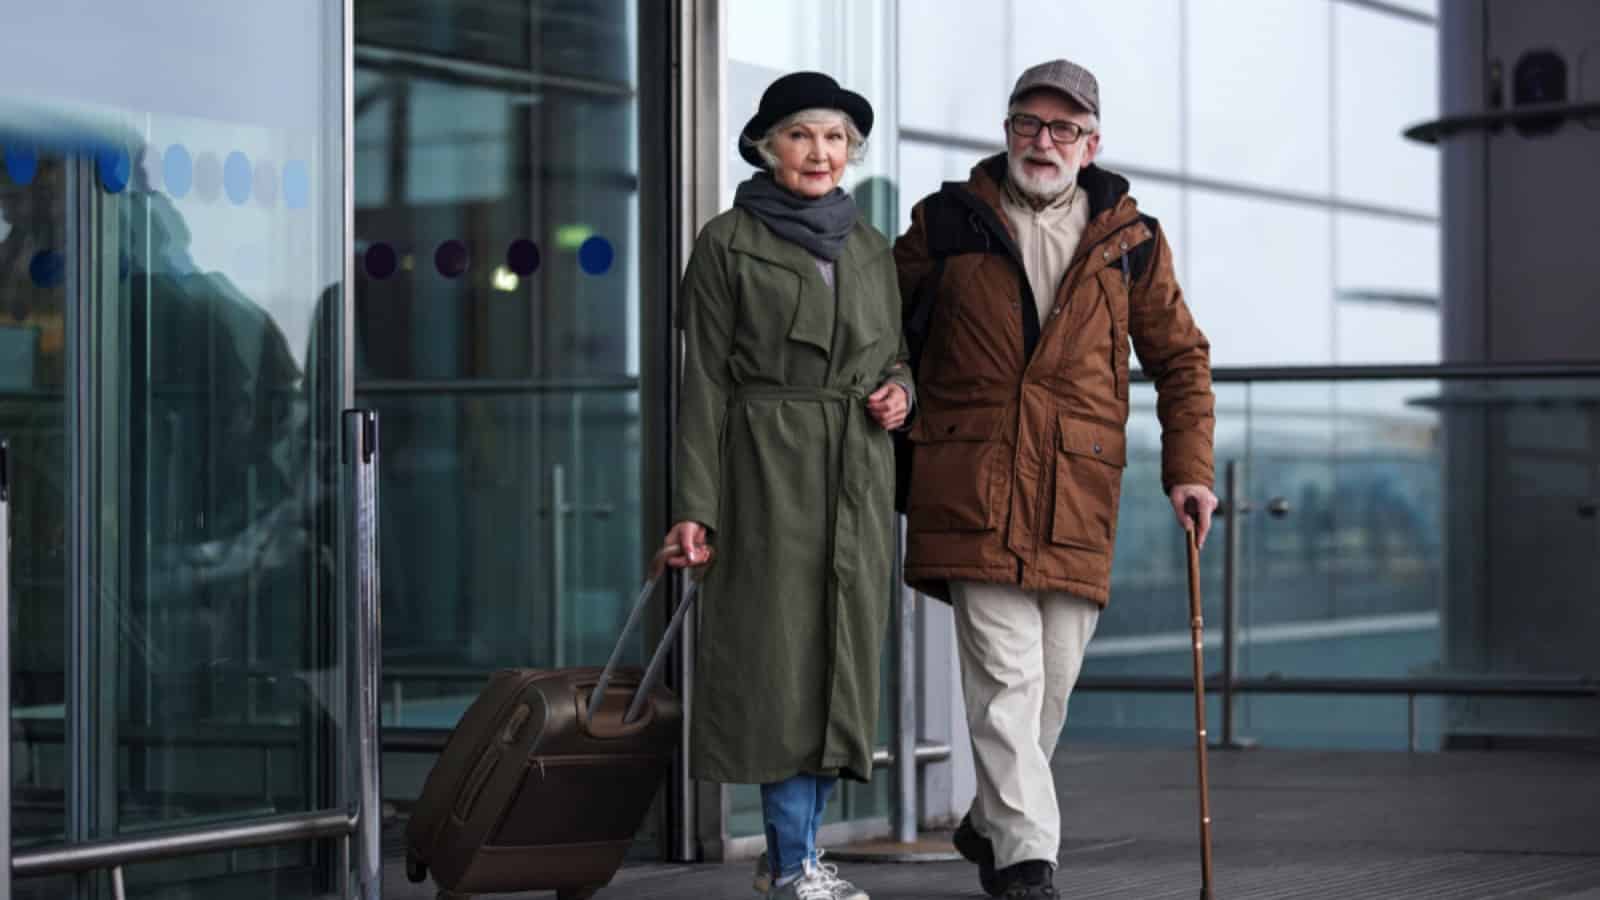 Old couples coming out of airport